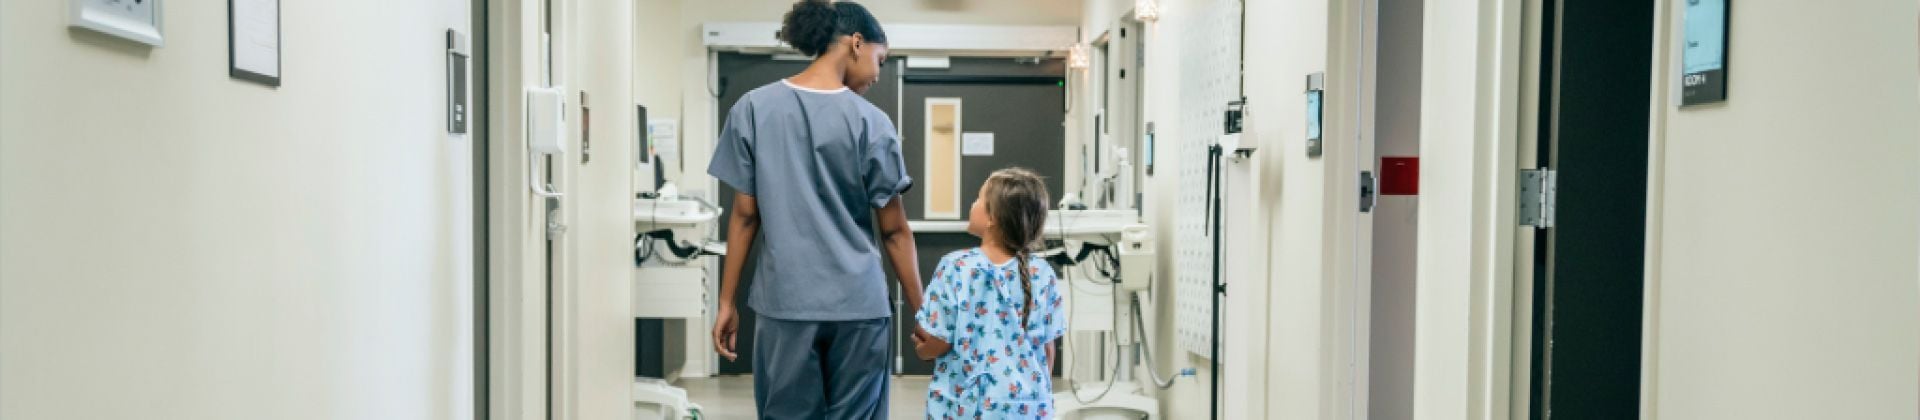 Black woman nurse walking down hospital hallway holding hand of White girl in hospital gown